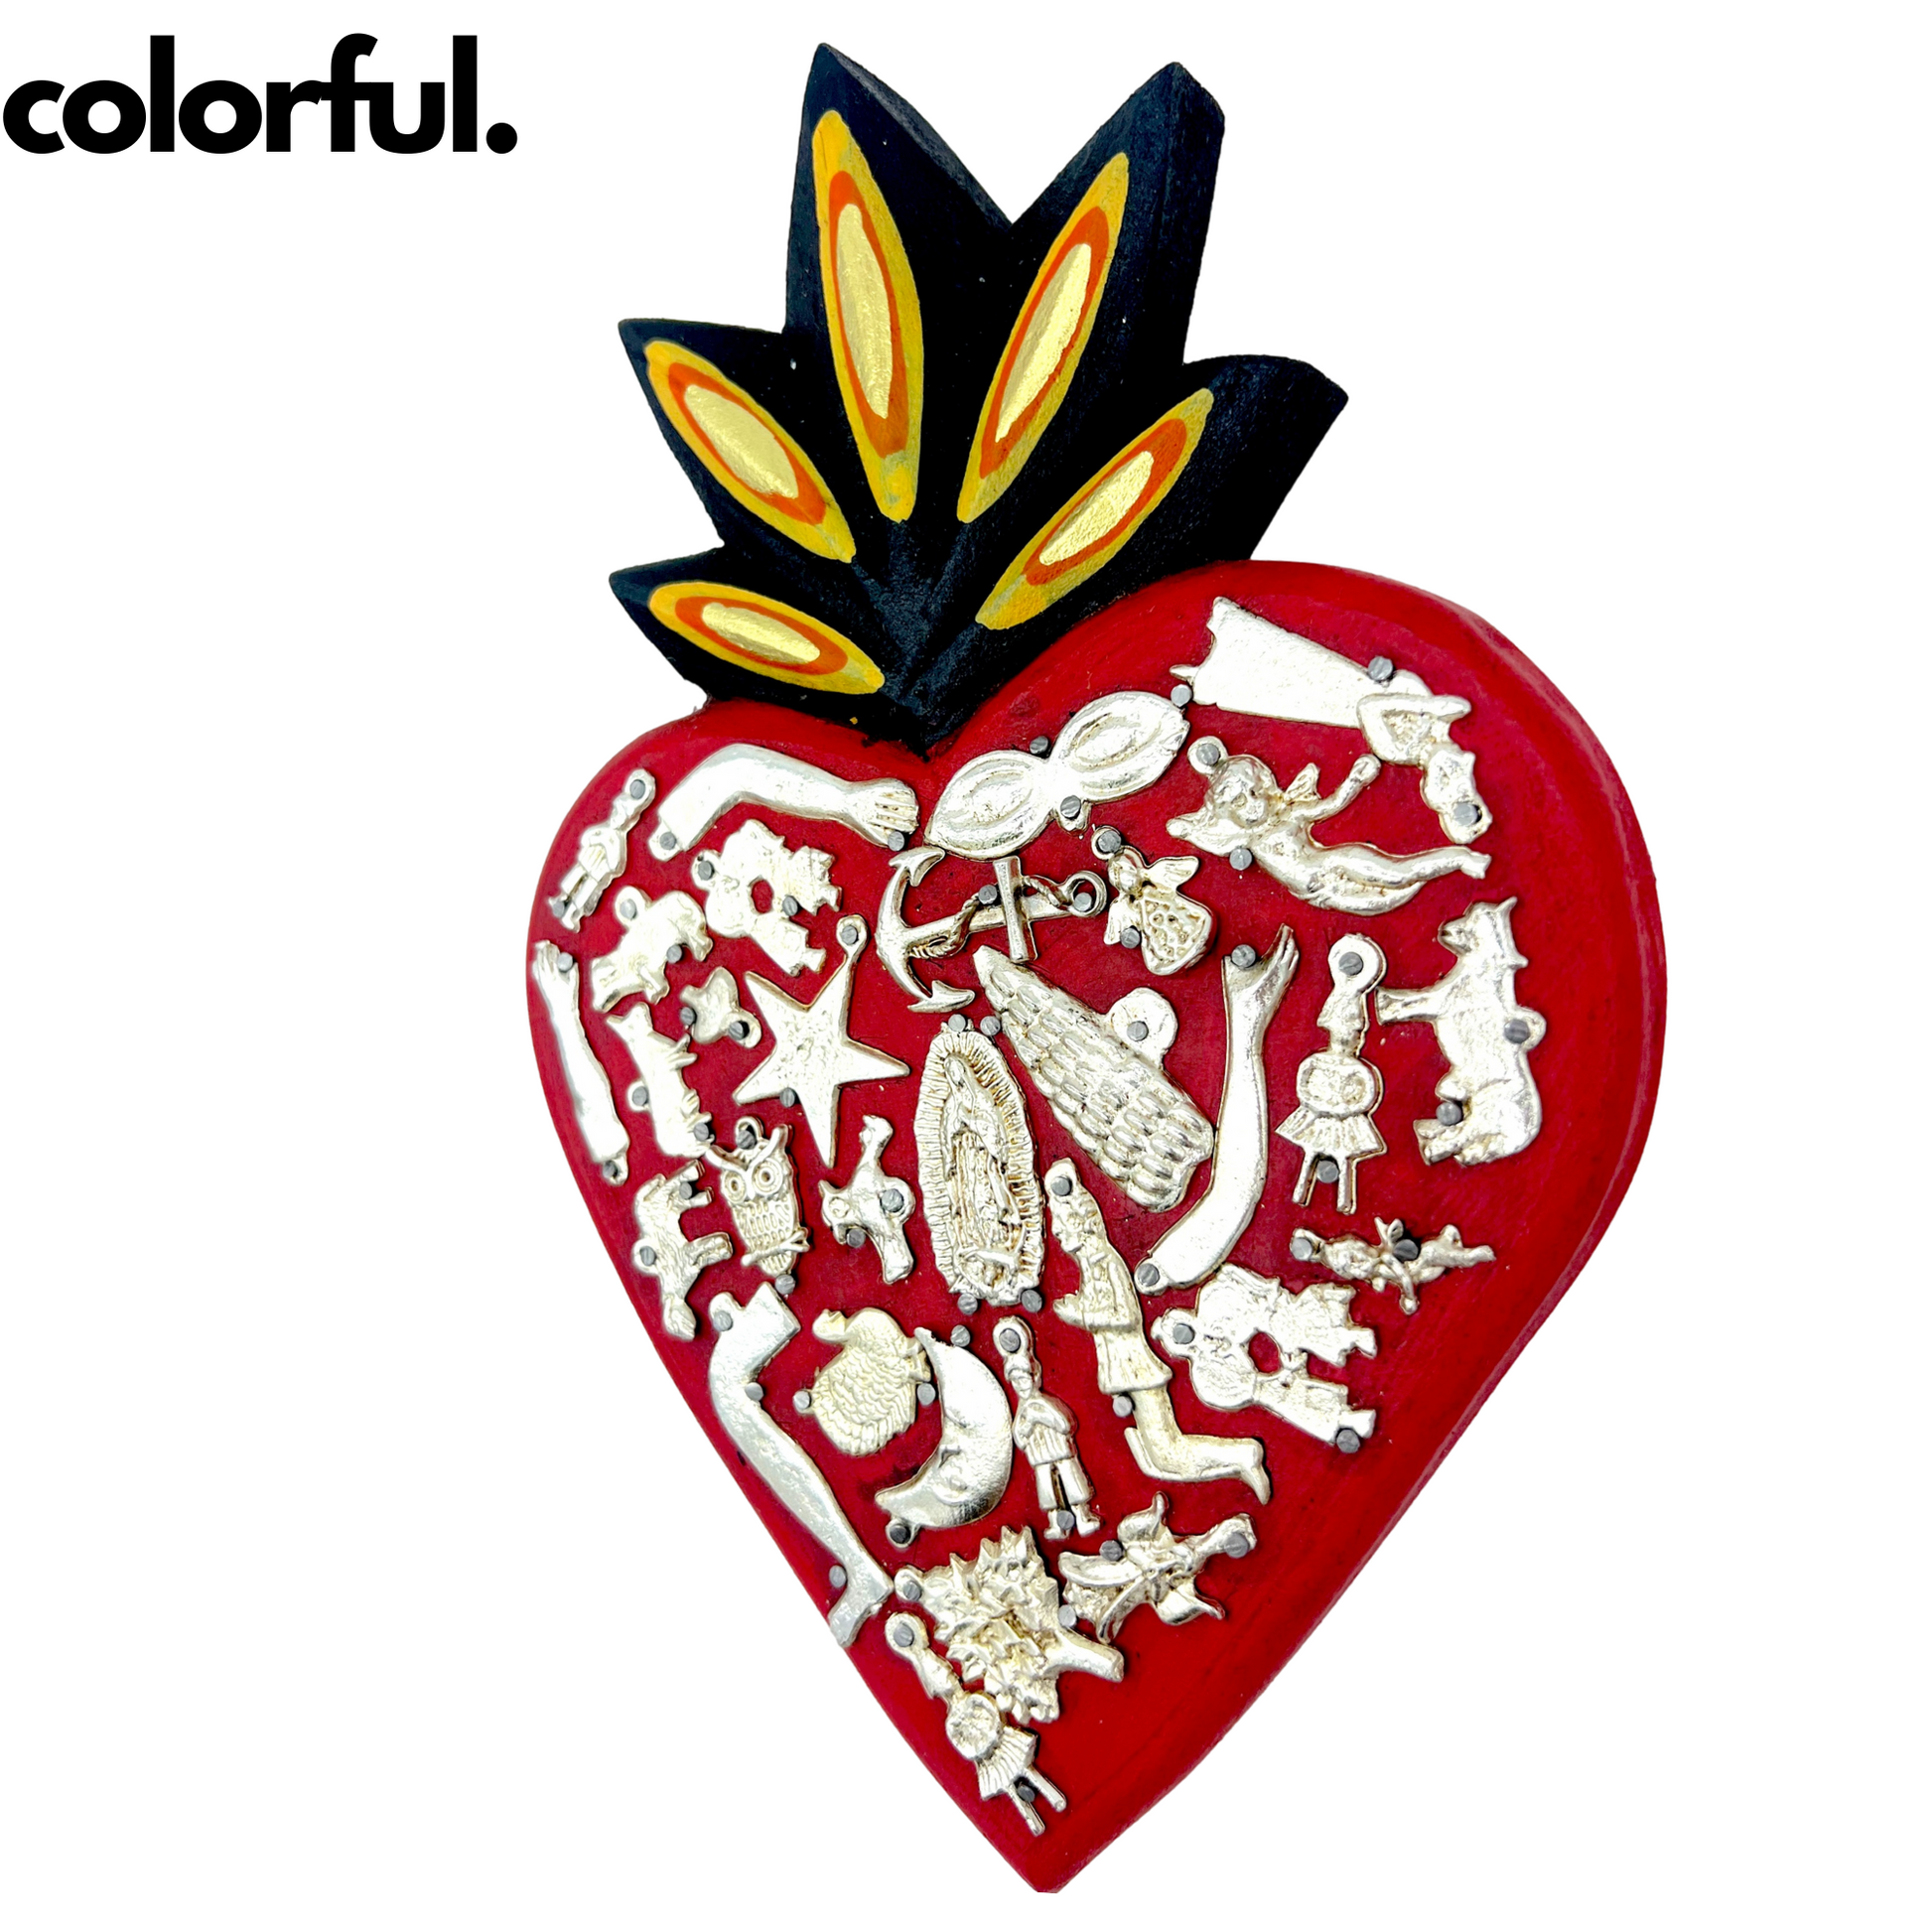 colorful Ex Voto Wooden Sacred Heart, hand-painted by Mexican artisans, featuring colorful milagros, perfect for wall decor and enhancing your space.